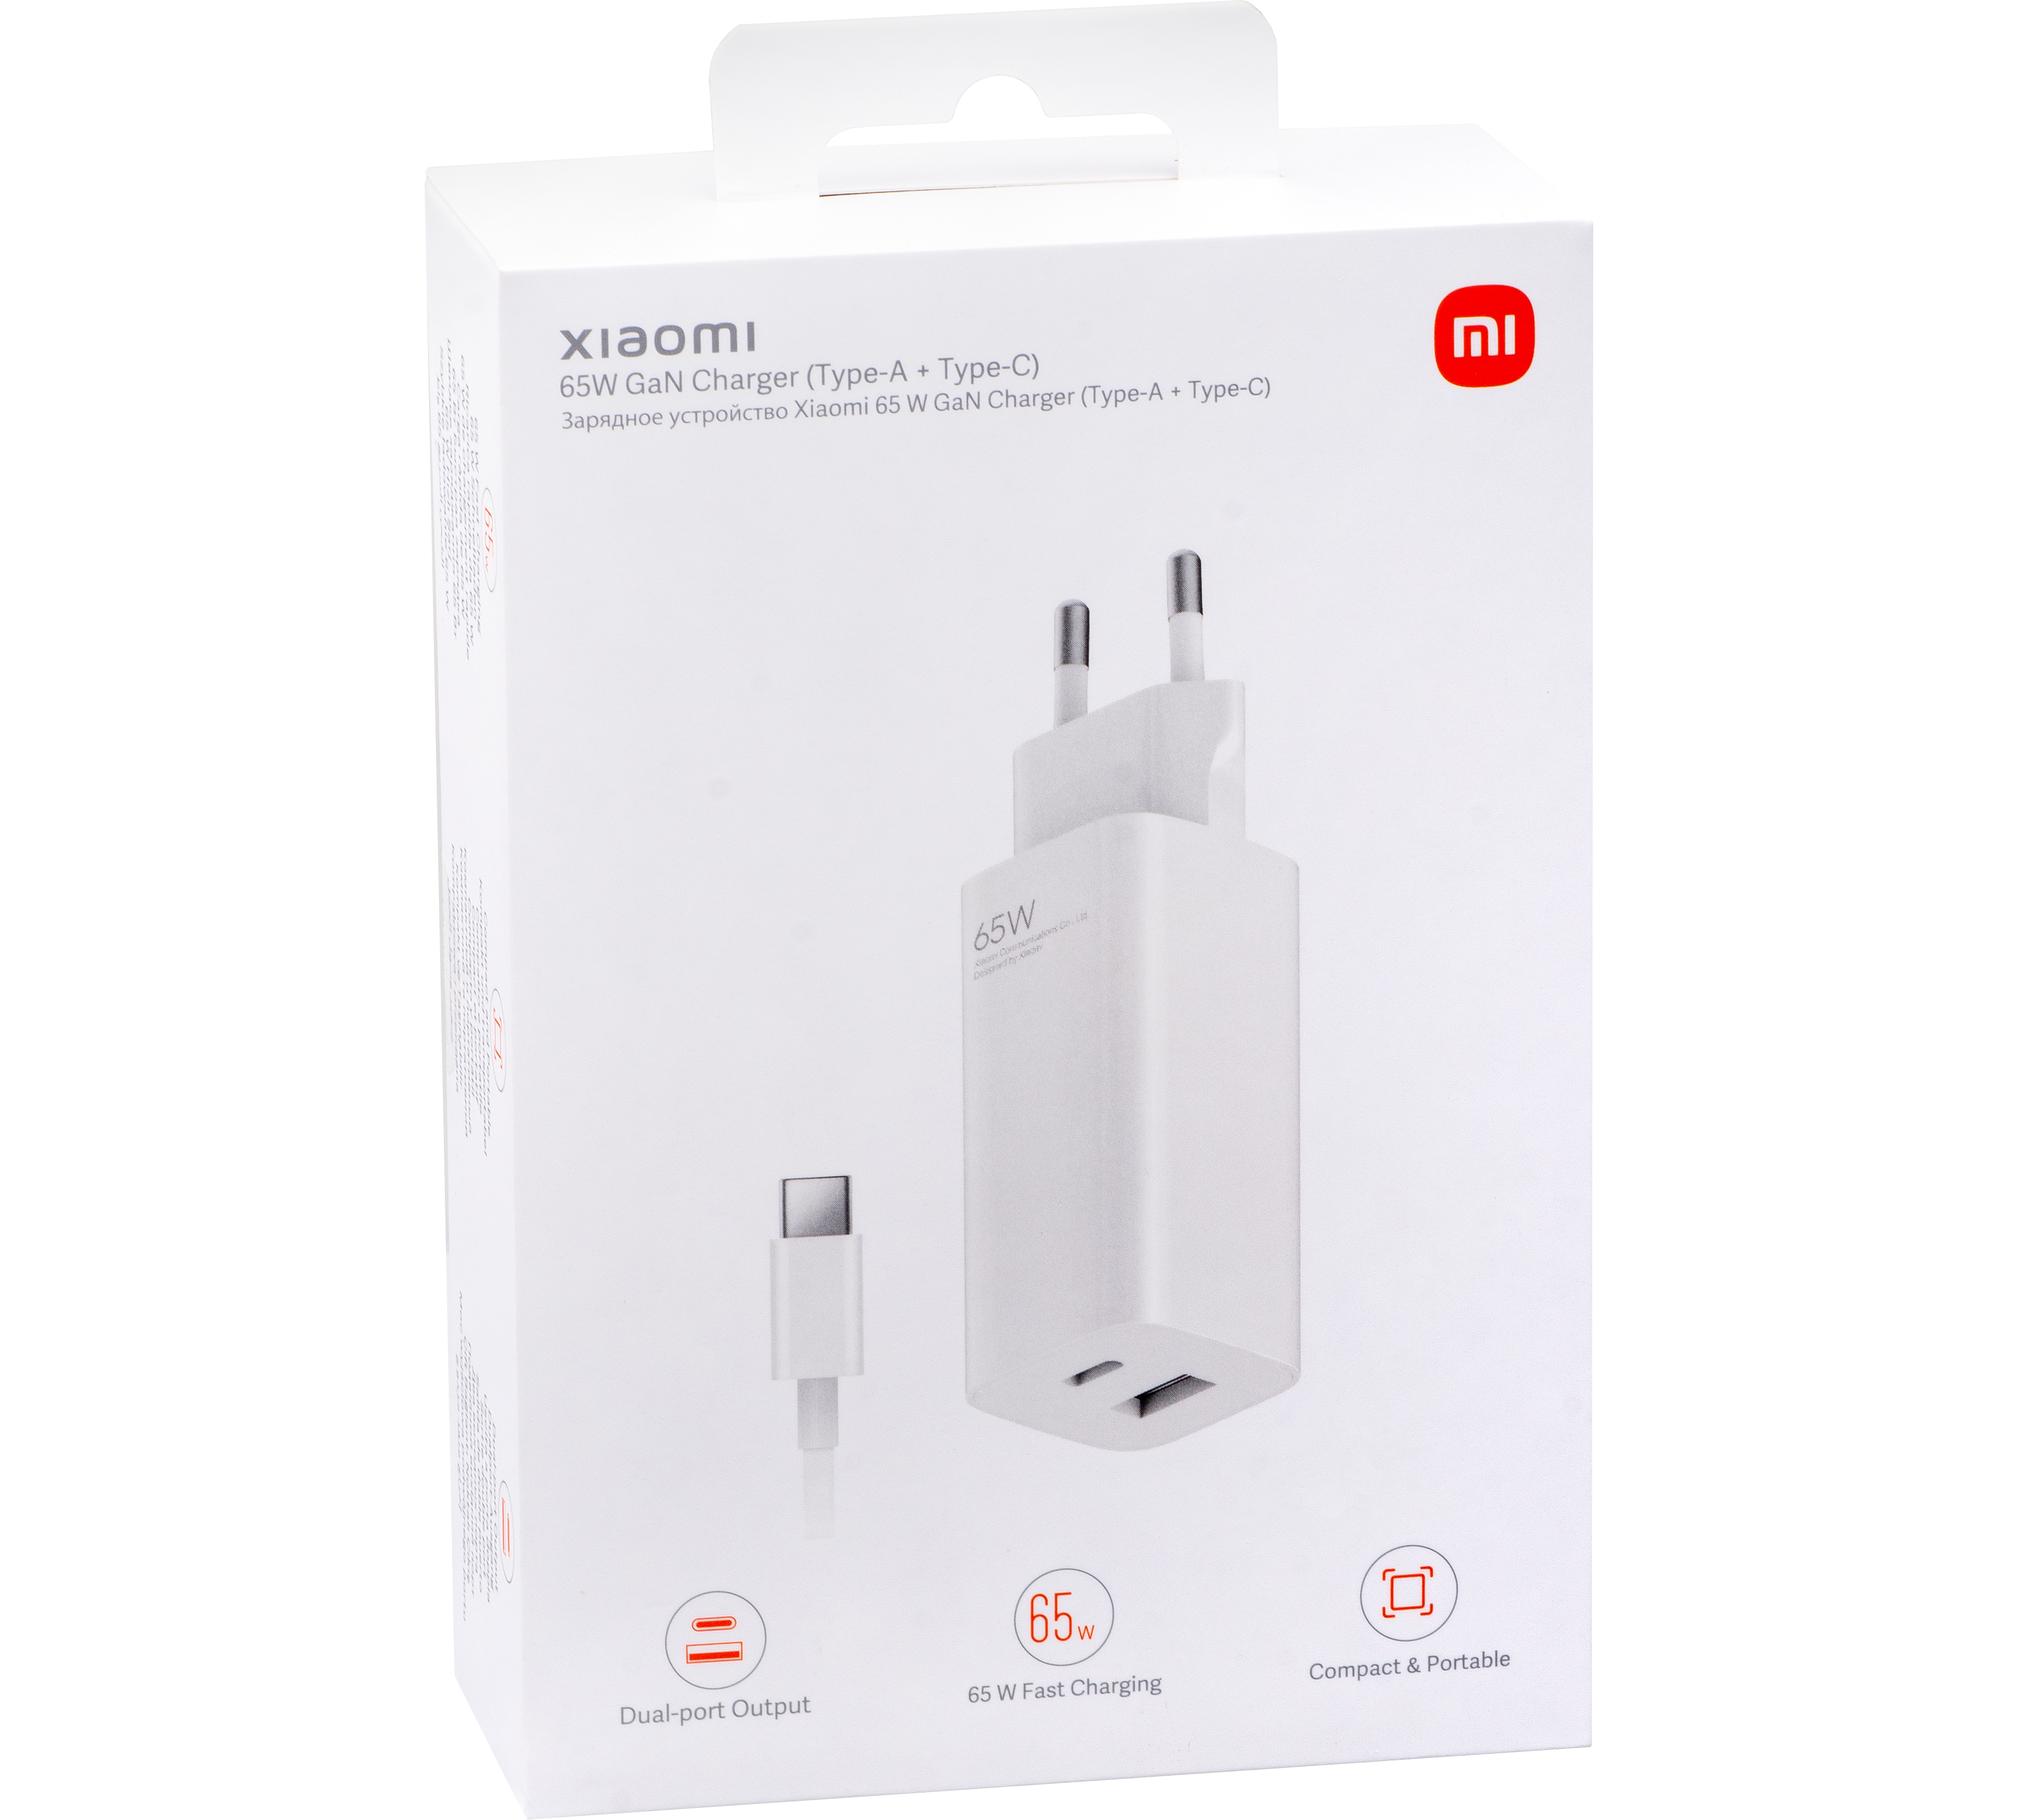 xiaomi-mi-travel-charger--28type-a--2B-type-c-29-65w-gan-tech-with-cable-white-bhr5515gl--28eu-blister-29